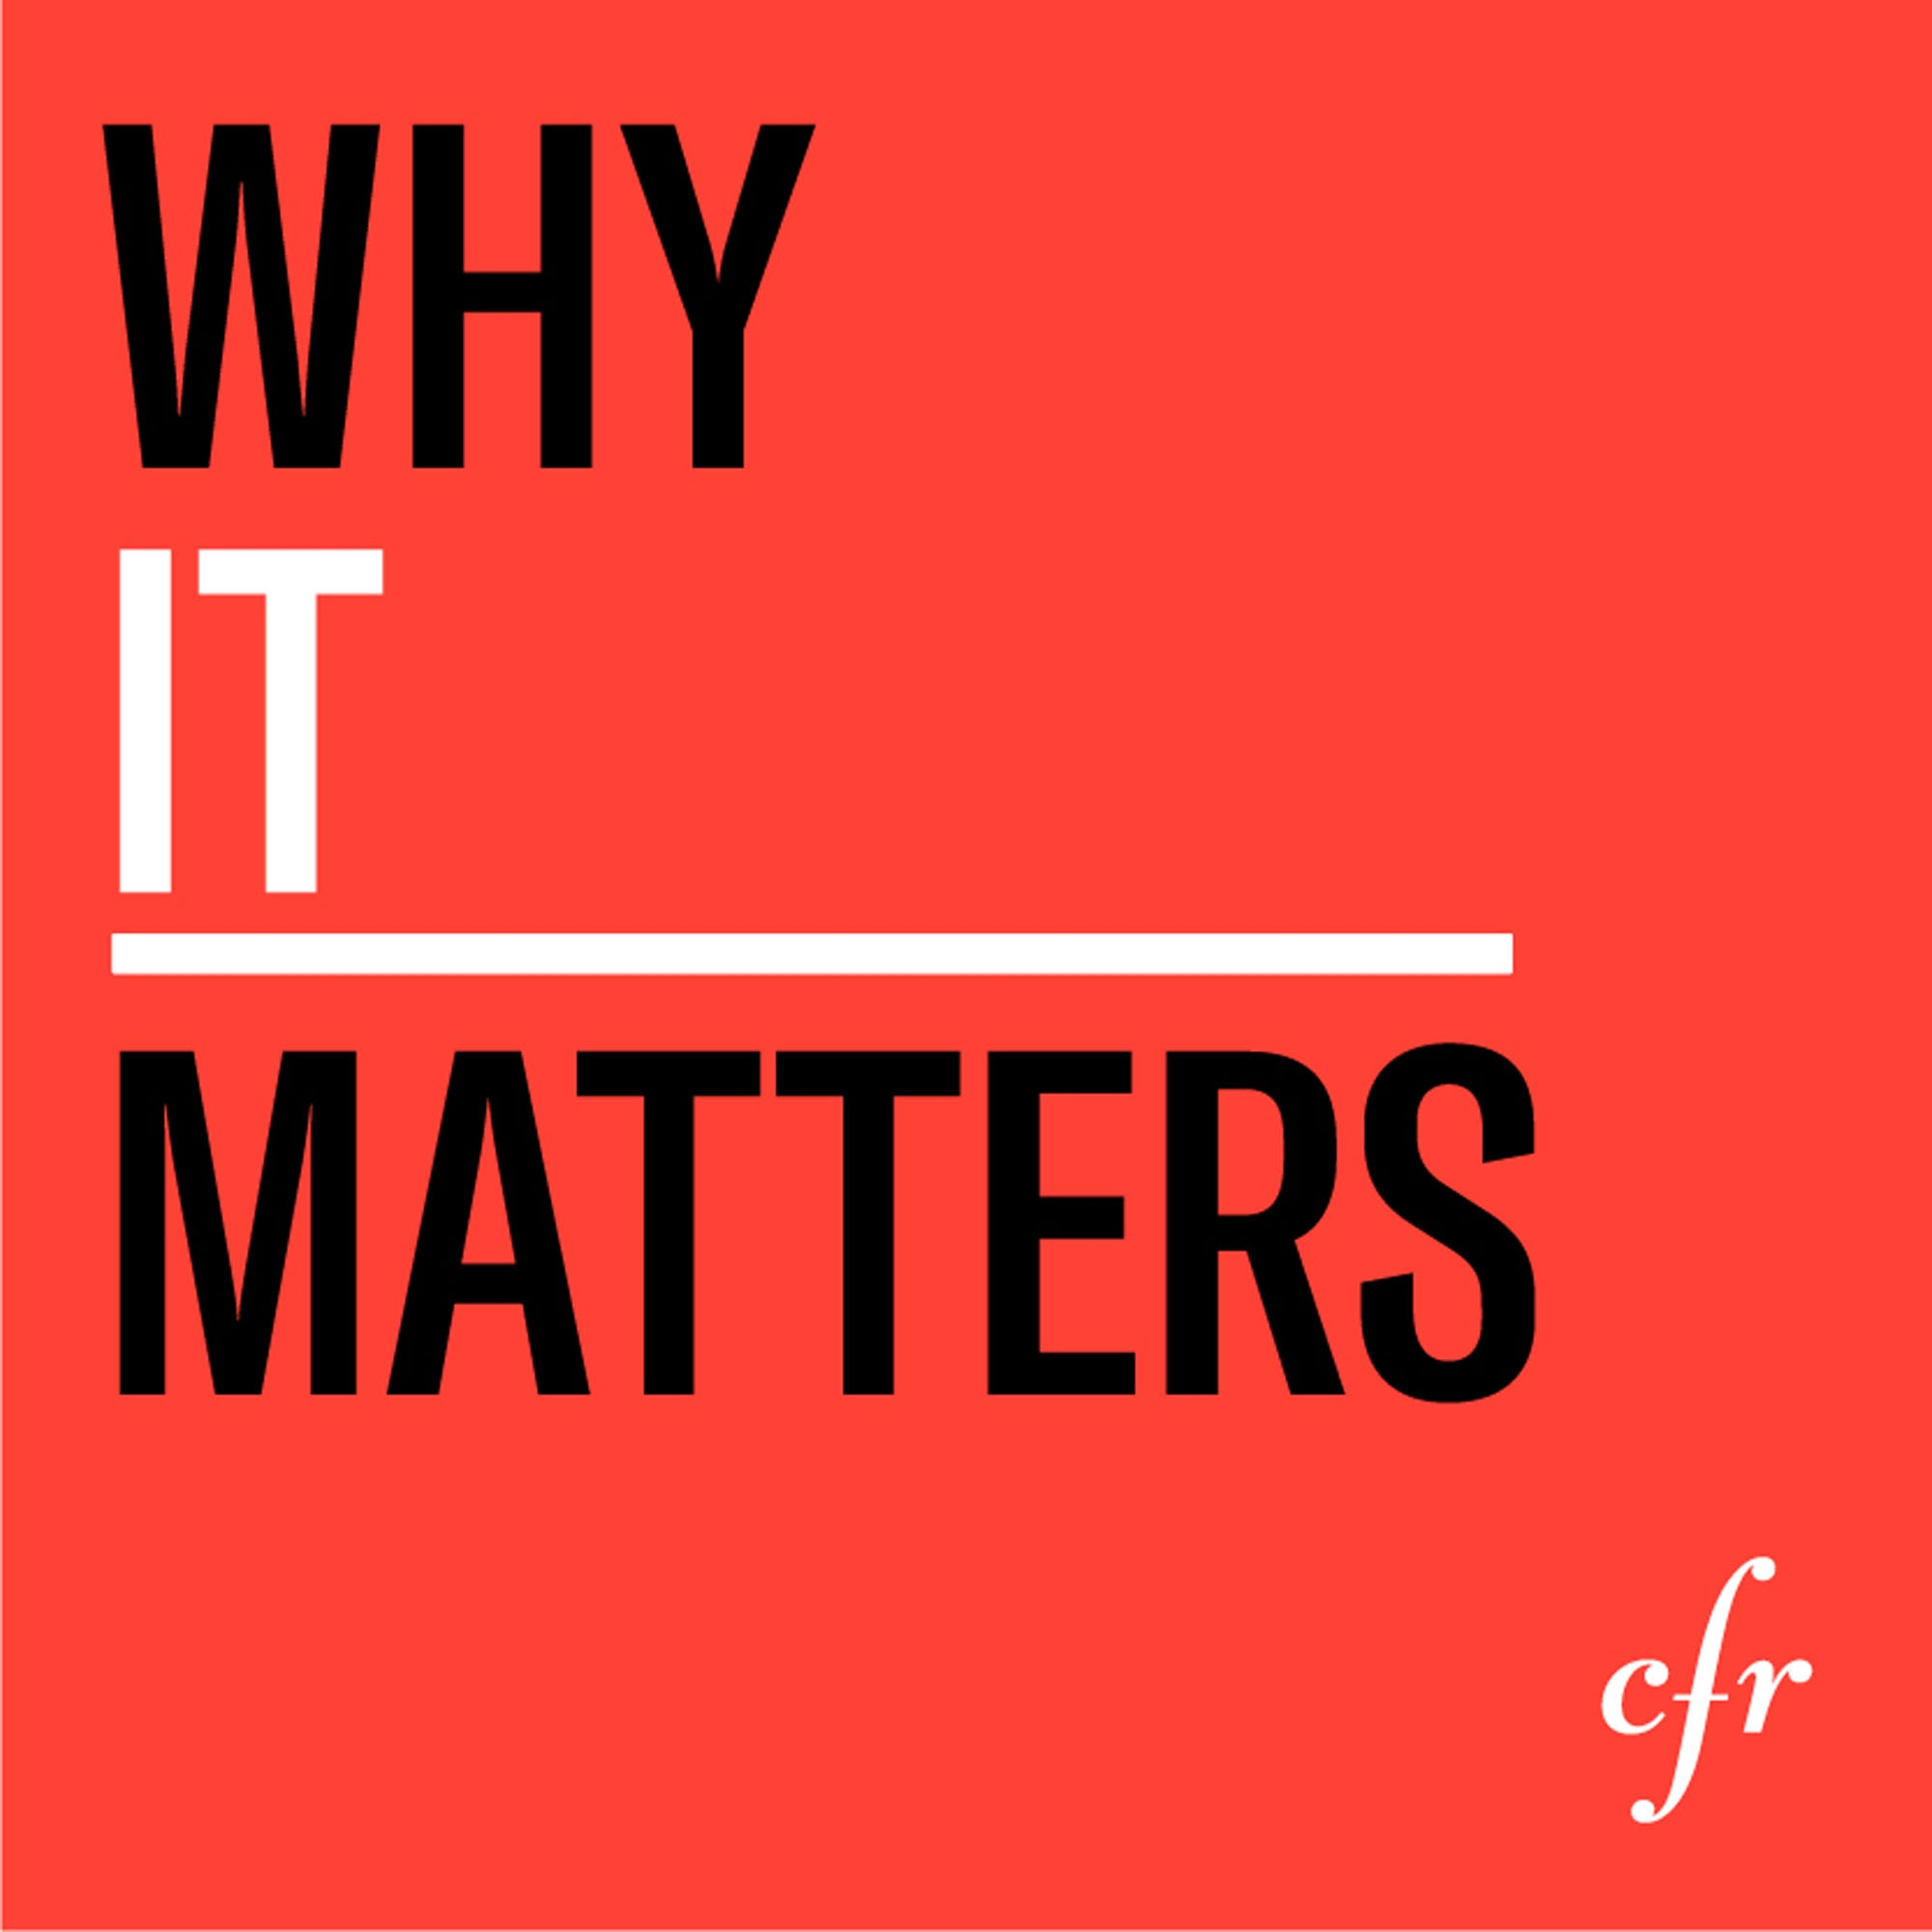 <span class='italics'><a href='https://www.cfr.org/podcasts/why-it-matters' class='linktext' target='_blank'>
Why It Matters</a></span> is launched as CFR’s newest podcast.